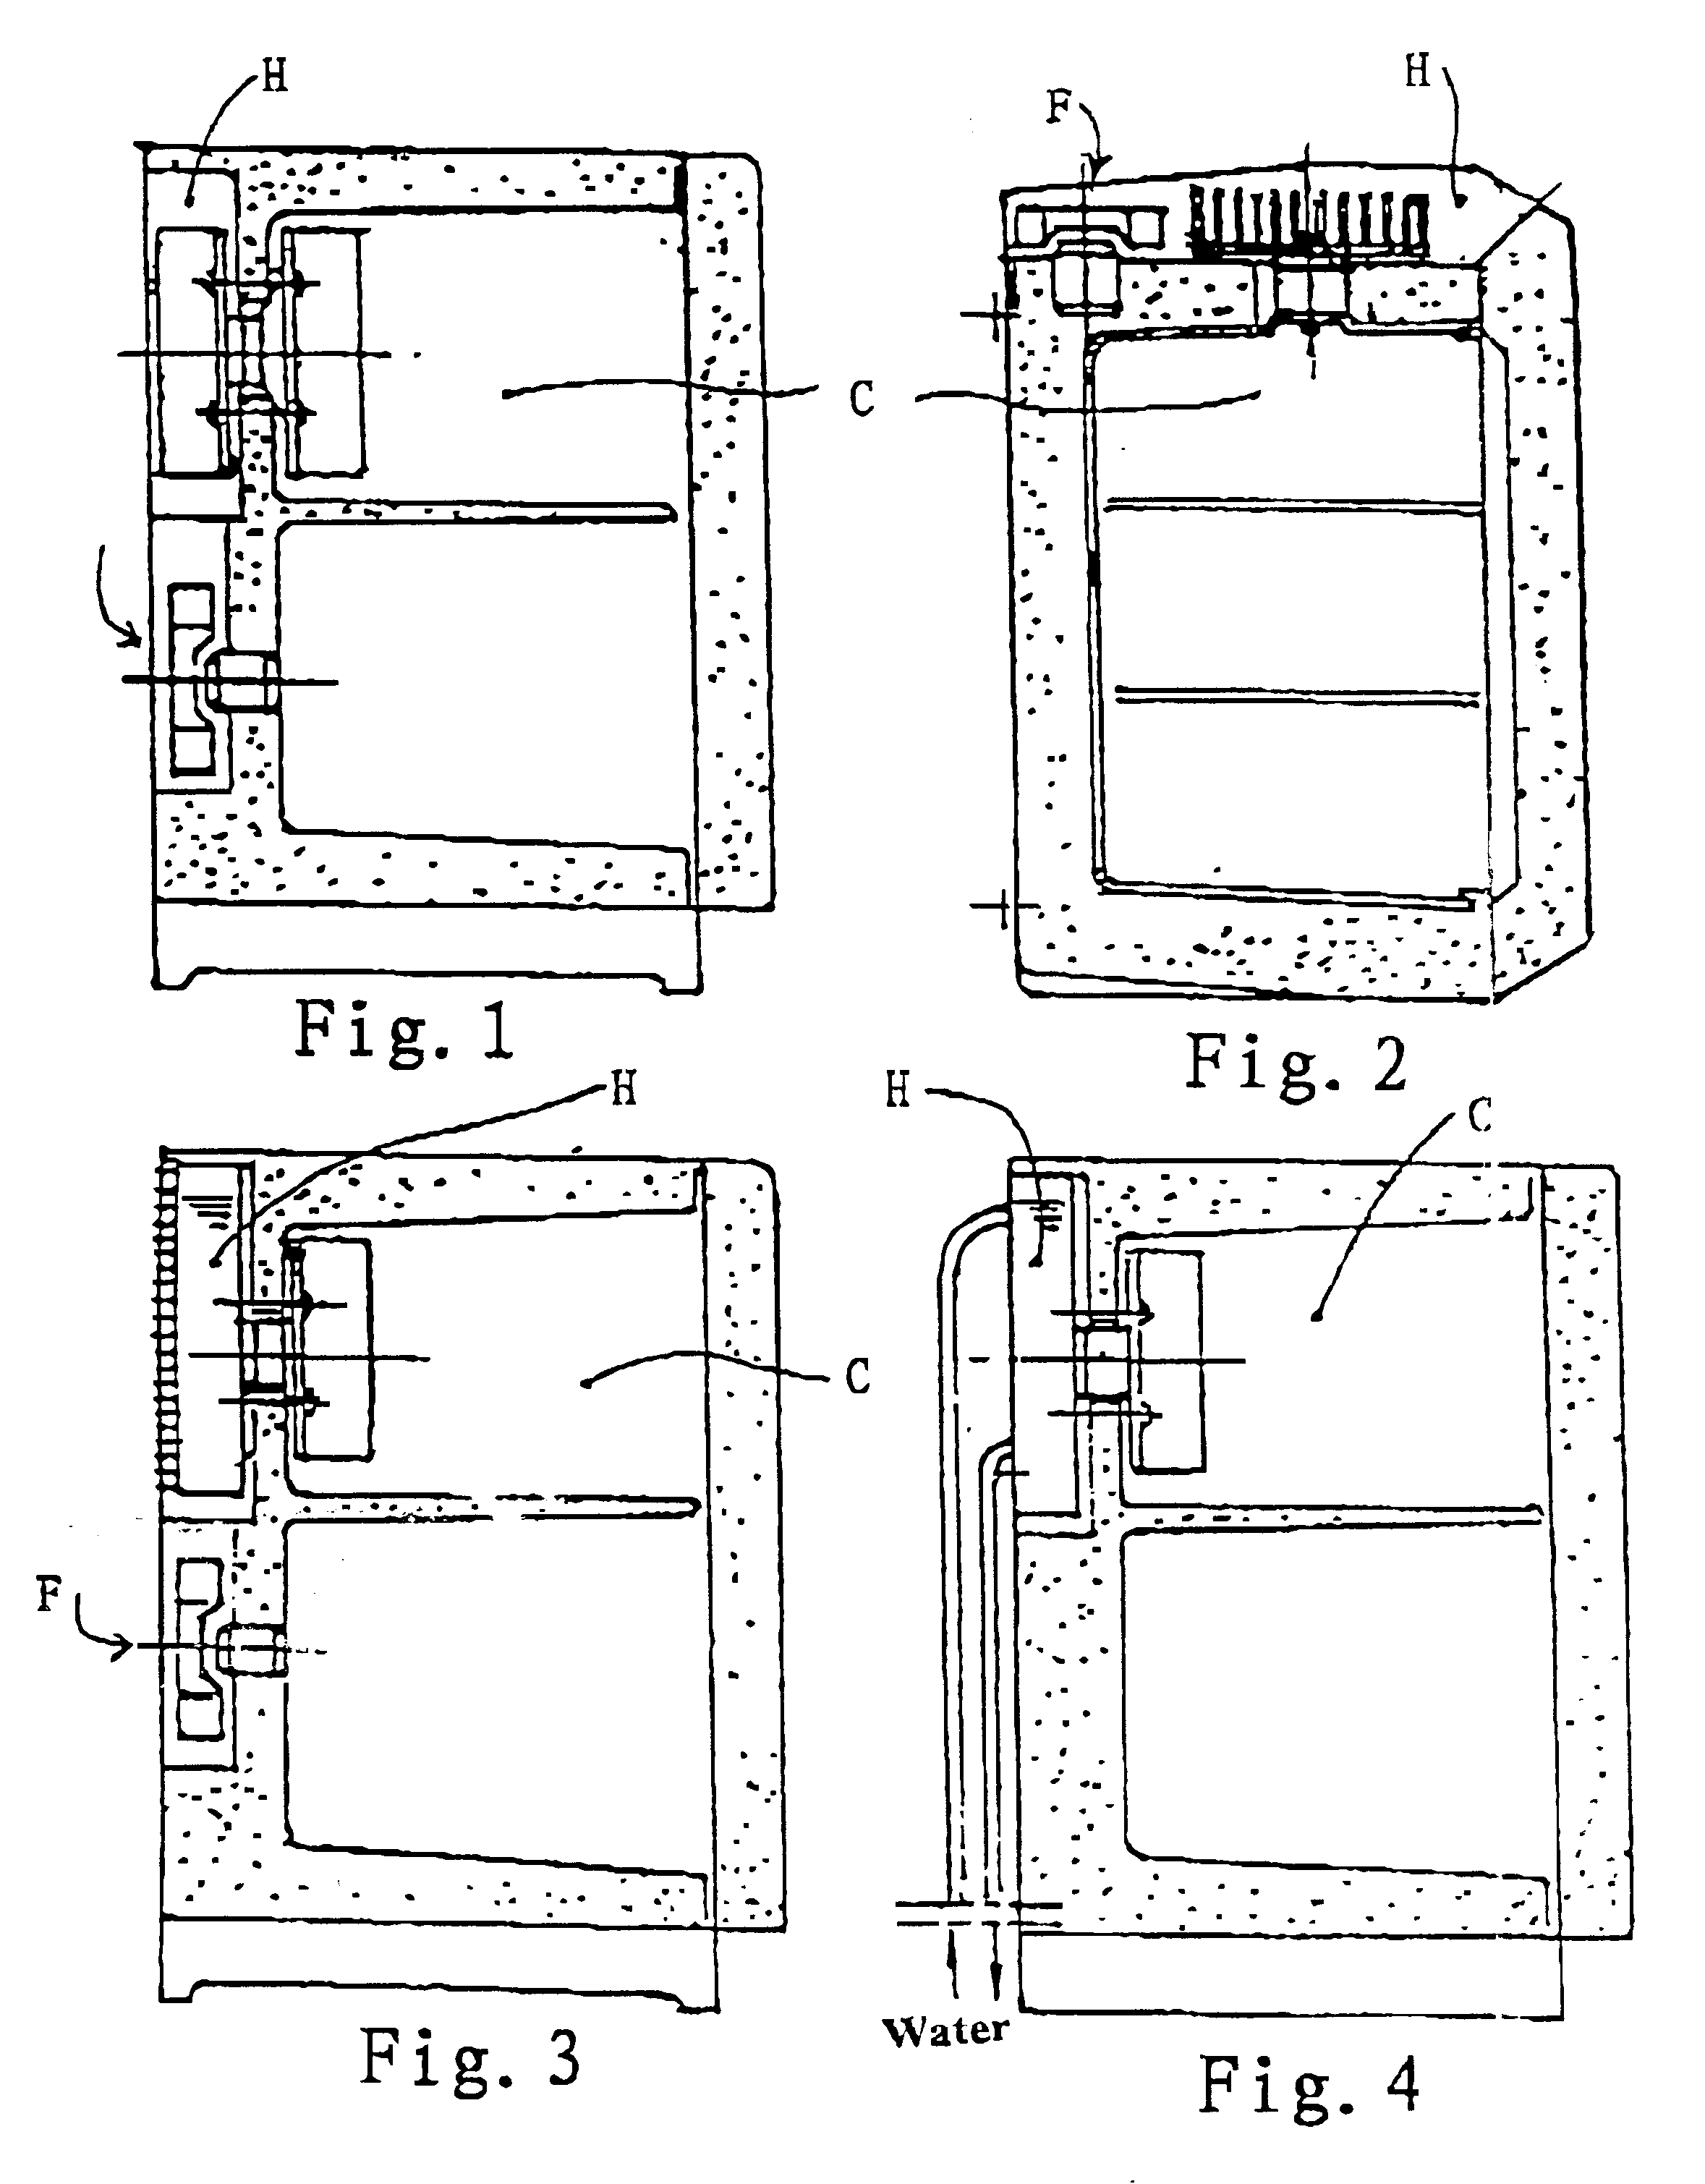 Thermoelectric cooling device using heat pipe for conducting and radiating